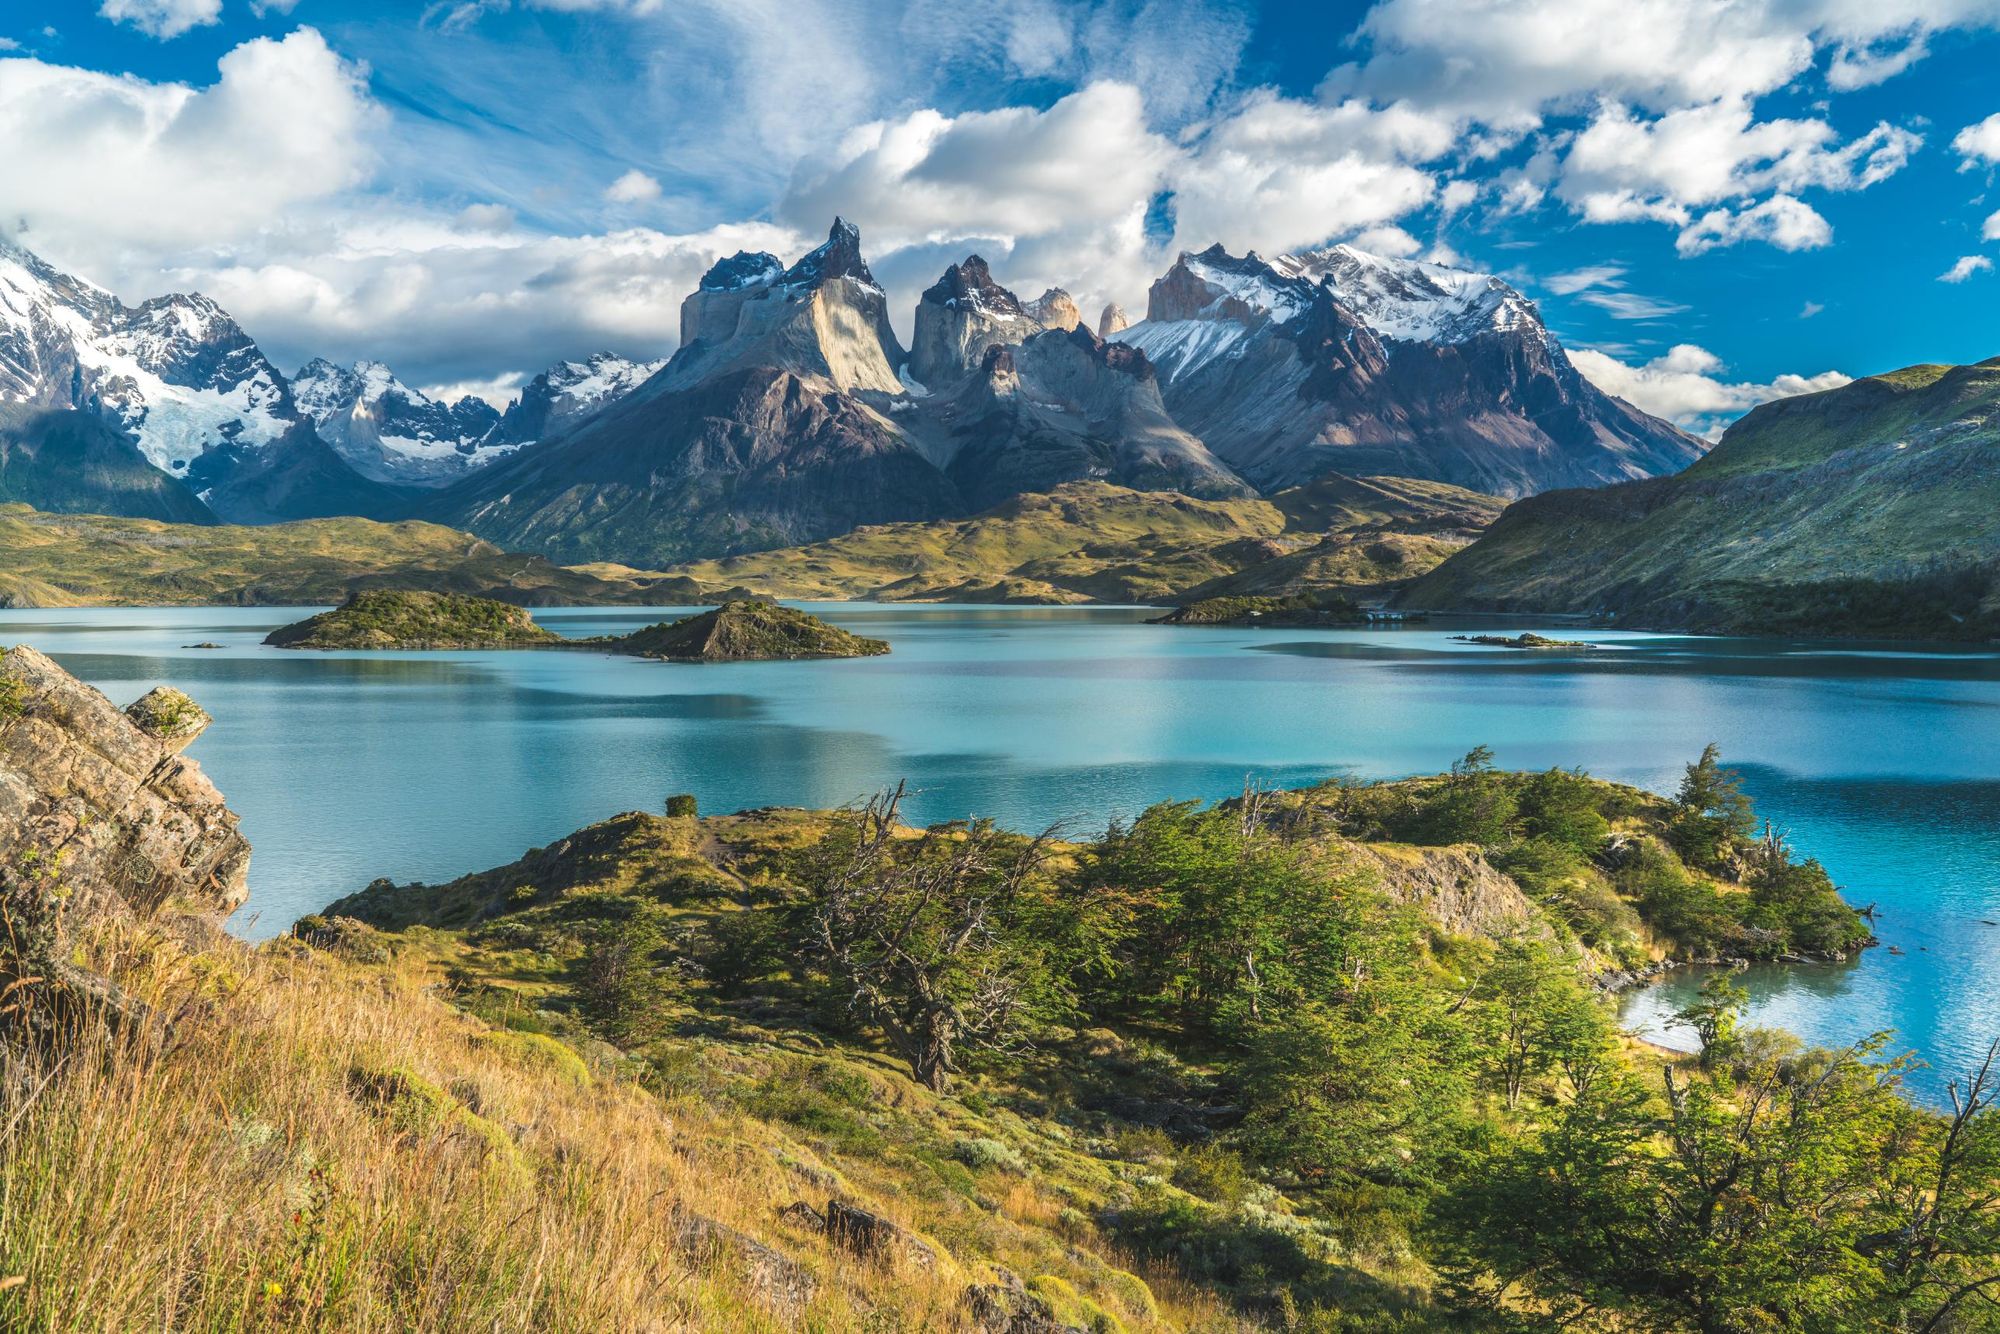 The famous view out over Lago Pehoe and Torres del Paine National Park. Photo: Getty